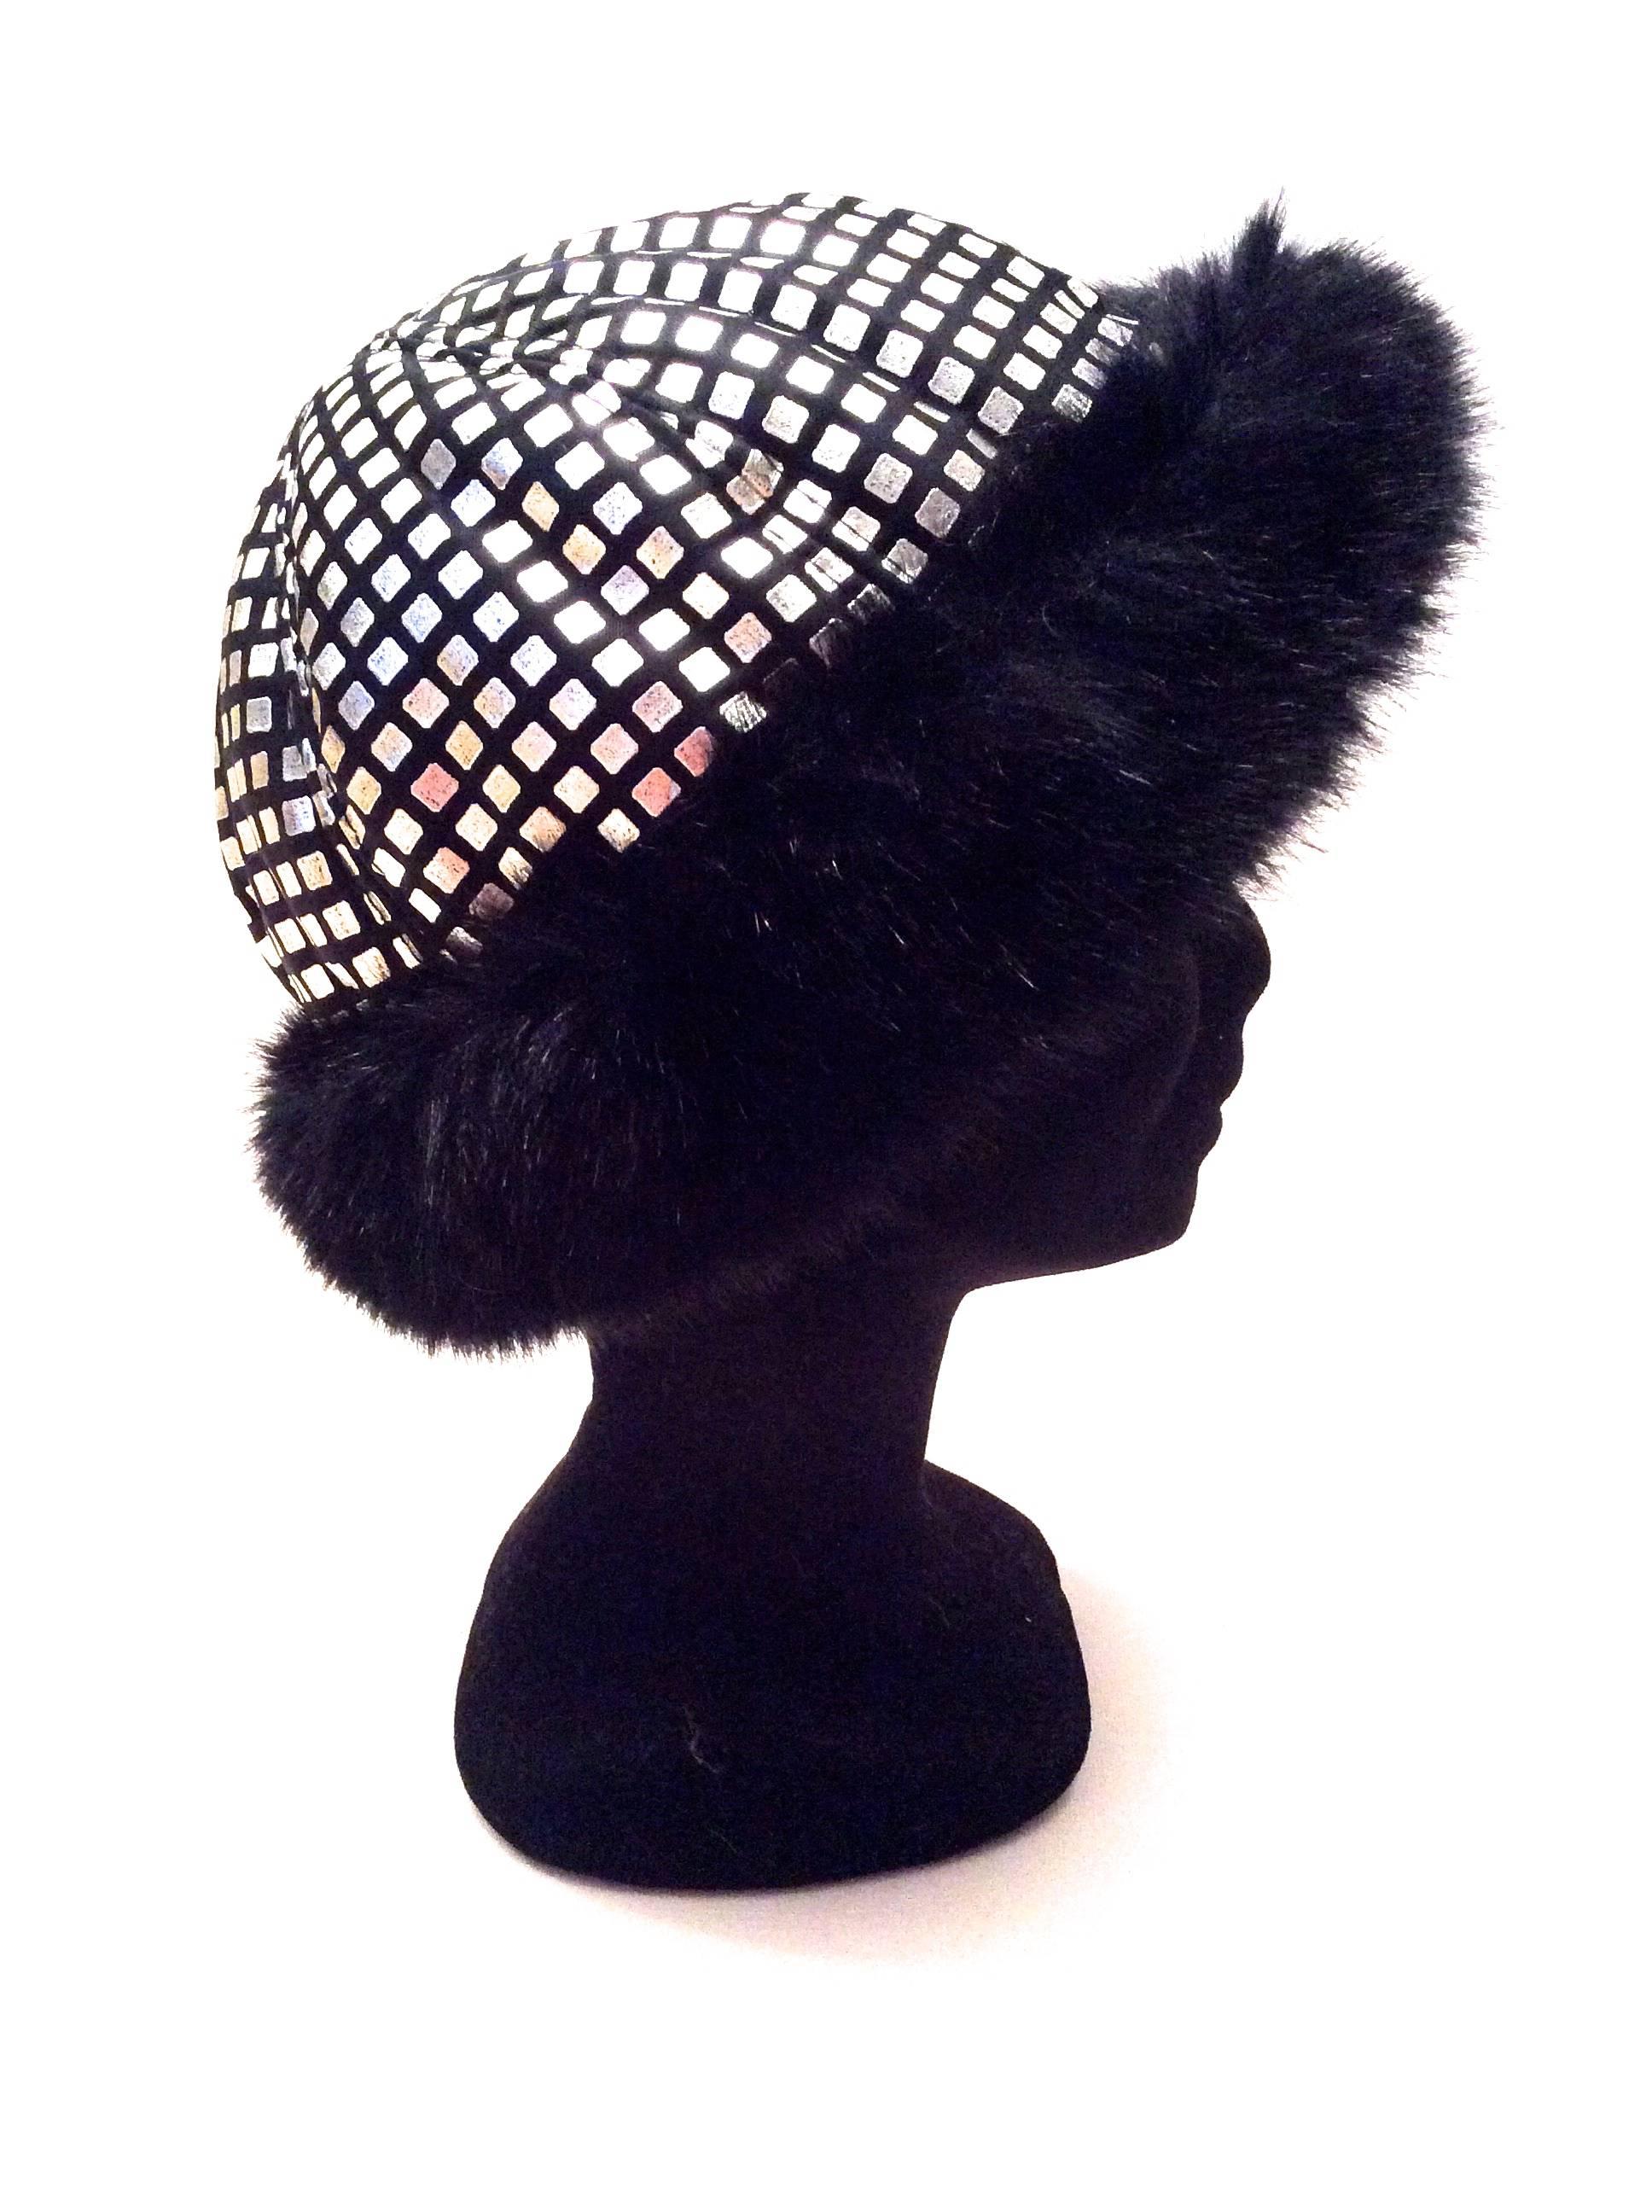 1960's Mod Silver and Black Geometric Hat For Sale 2